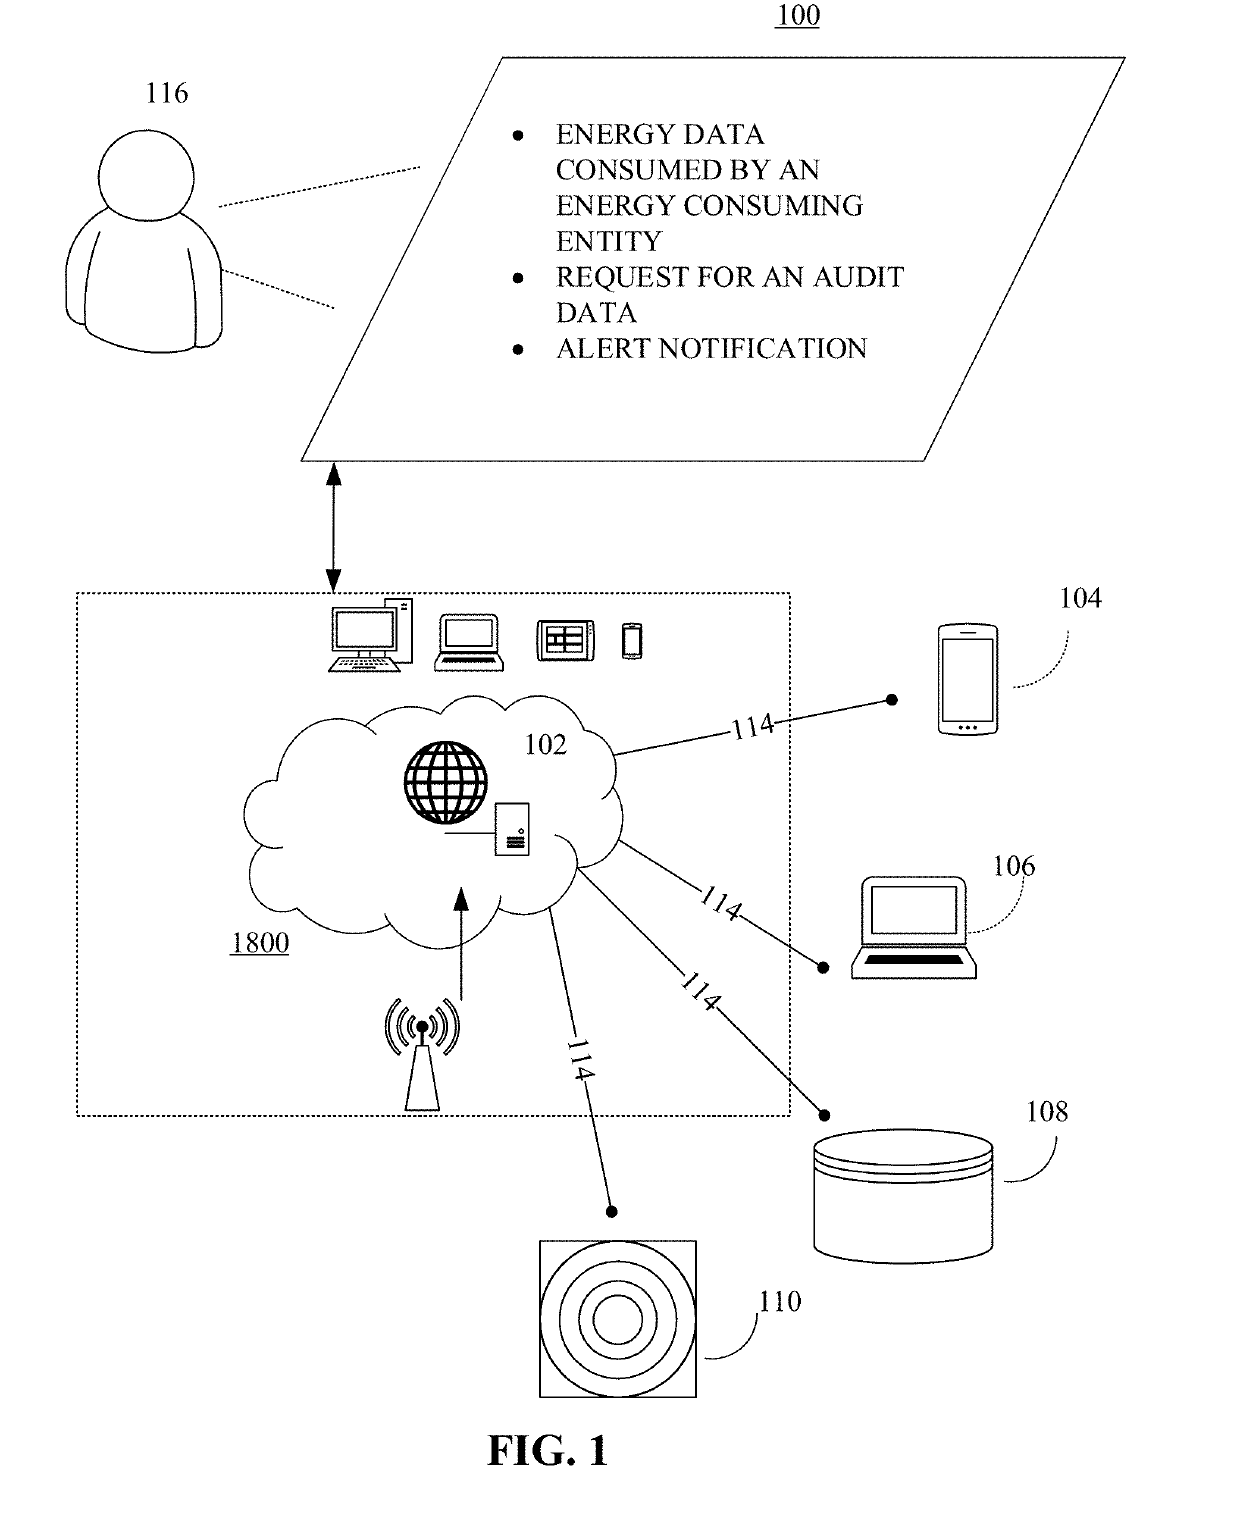 Methods, systems, apparatuses and devices for facilitating provisioning of audit data related to energy consumption, water consumption, water quality, greenhouse gas emissions, and air emissions using blockchain